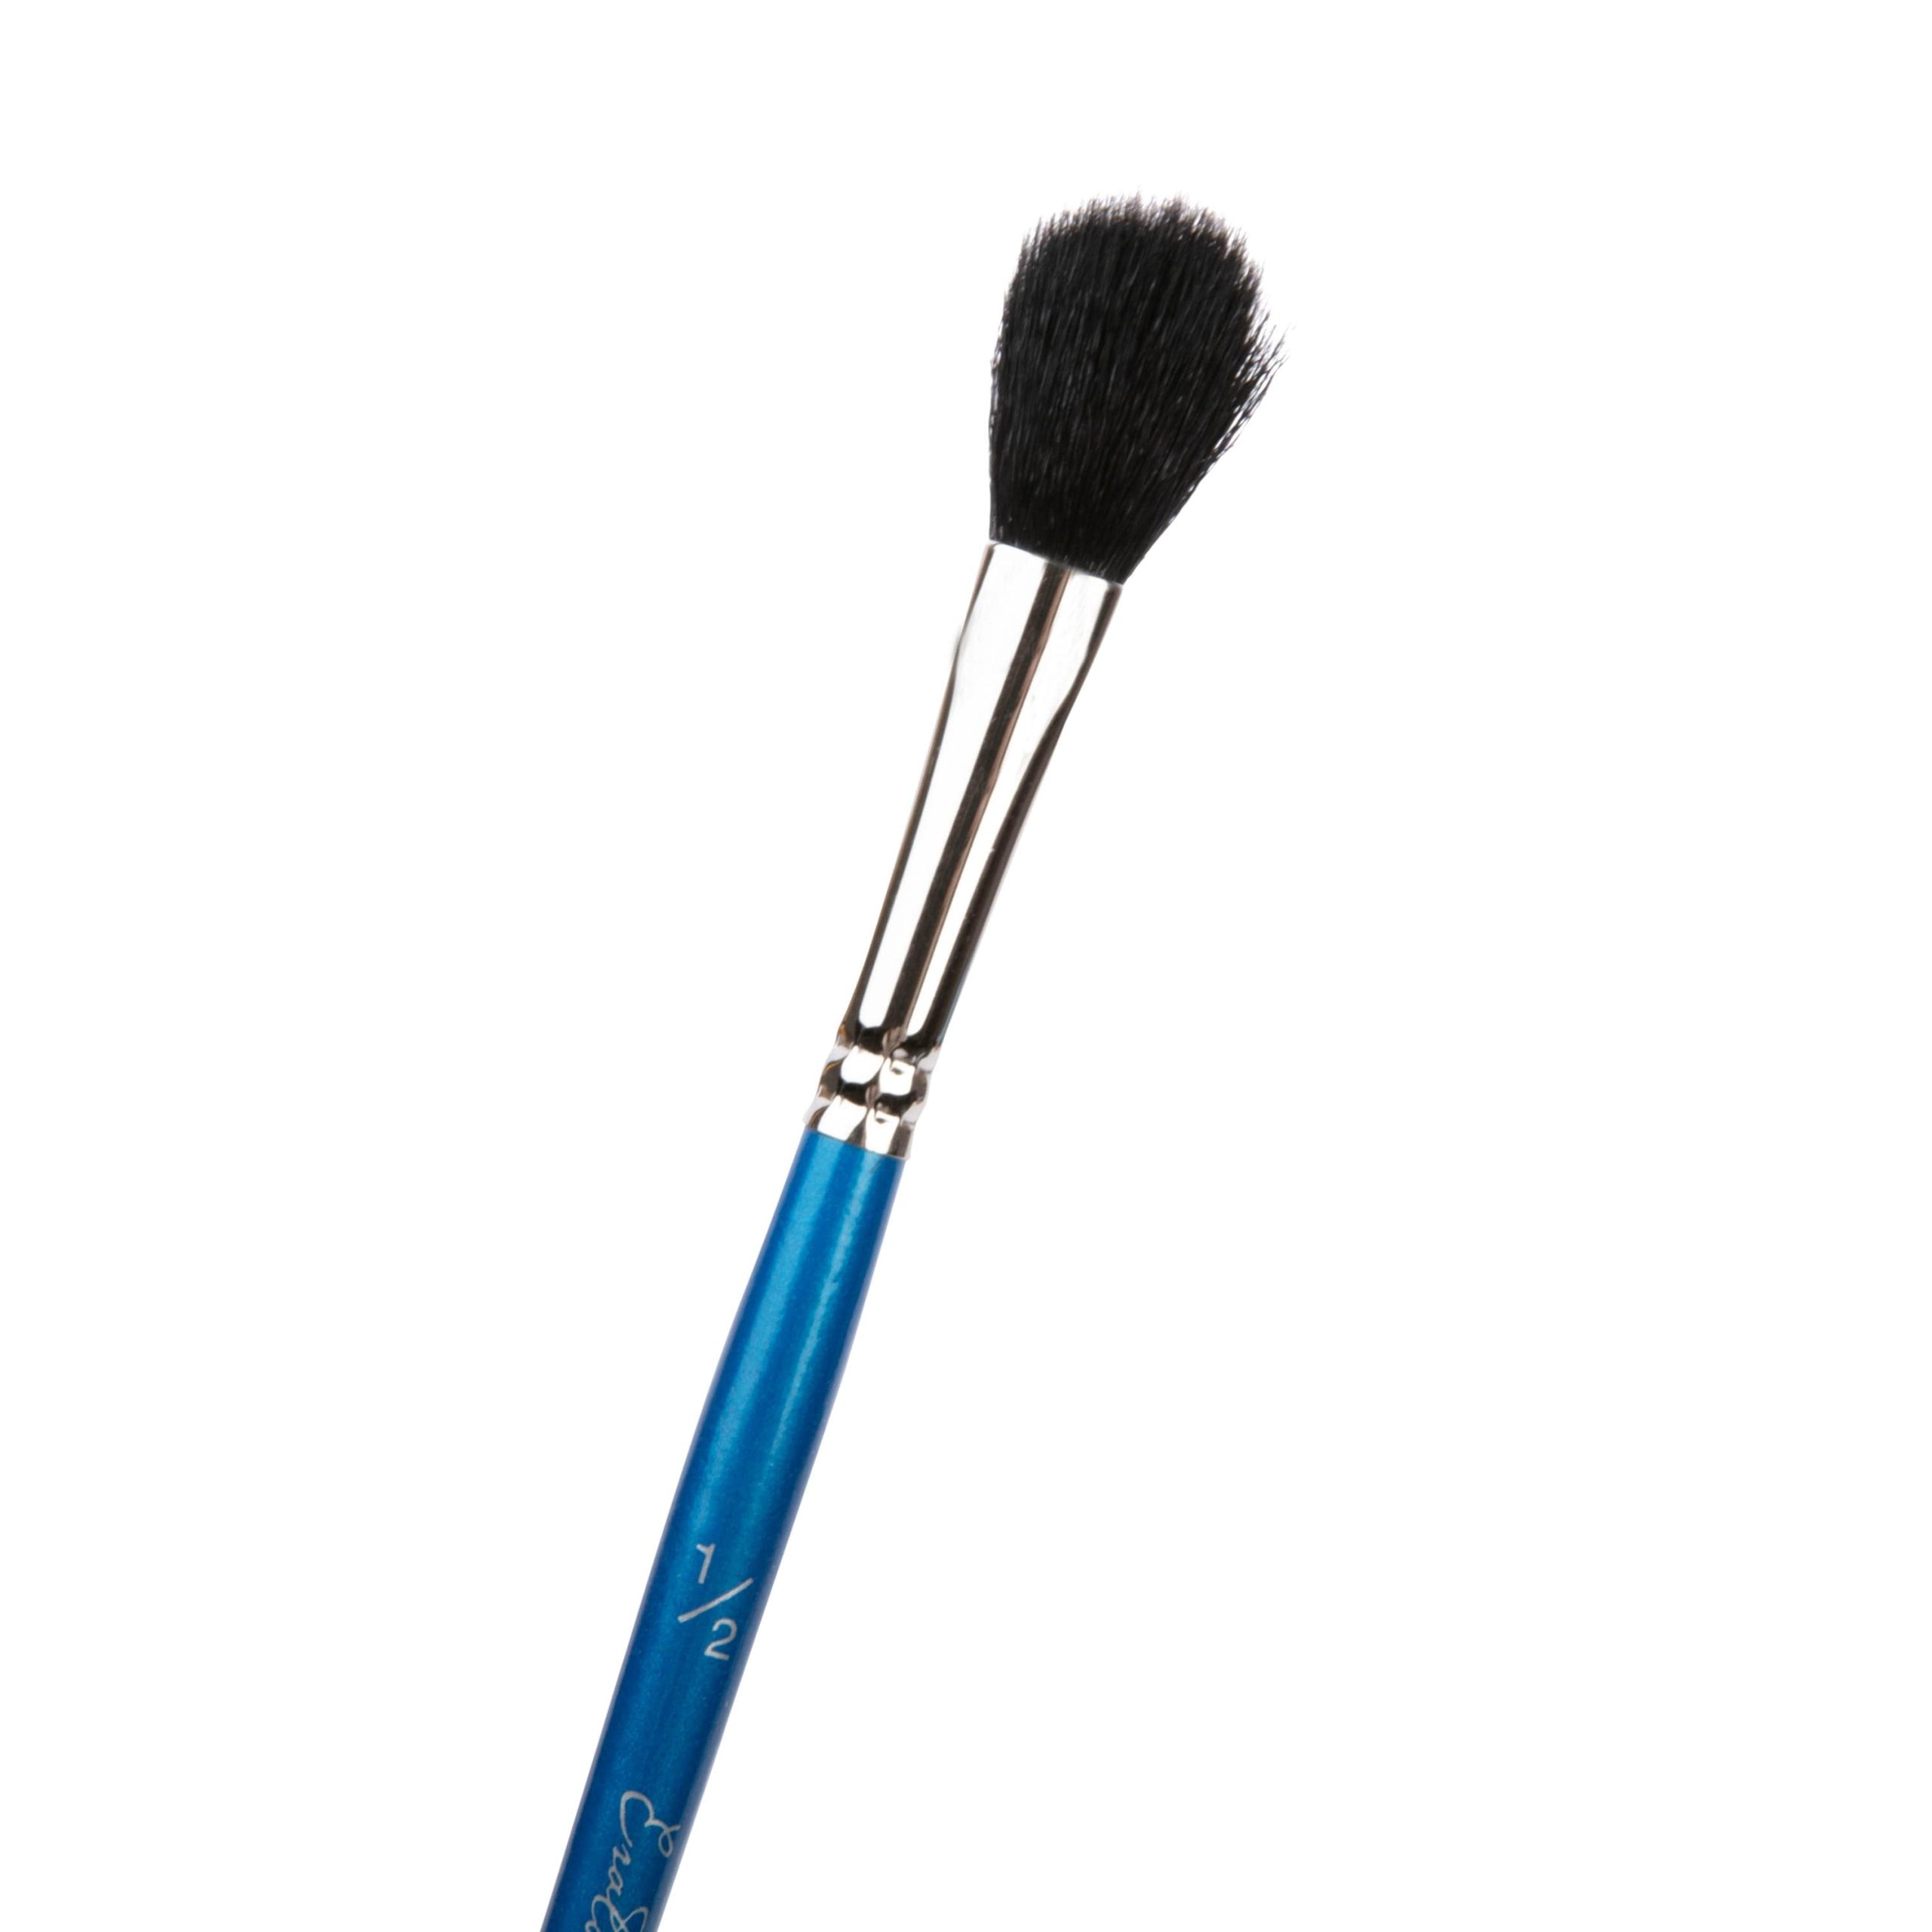 The most recent collection from Eraldo di Paolo Mop Brush 1/2in 637